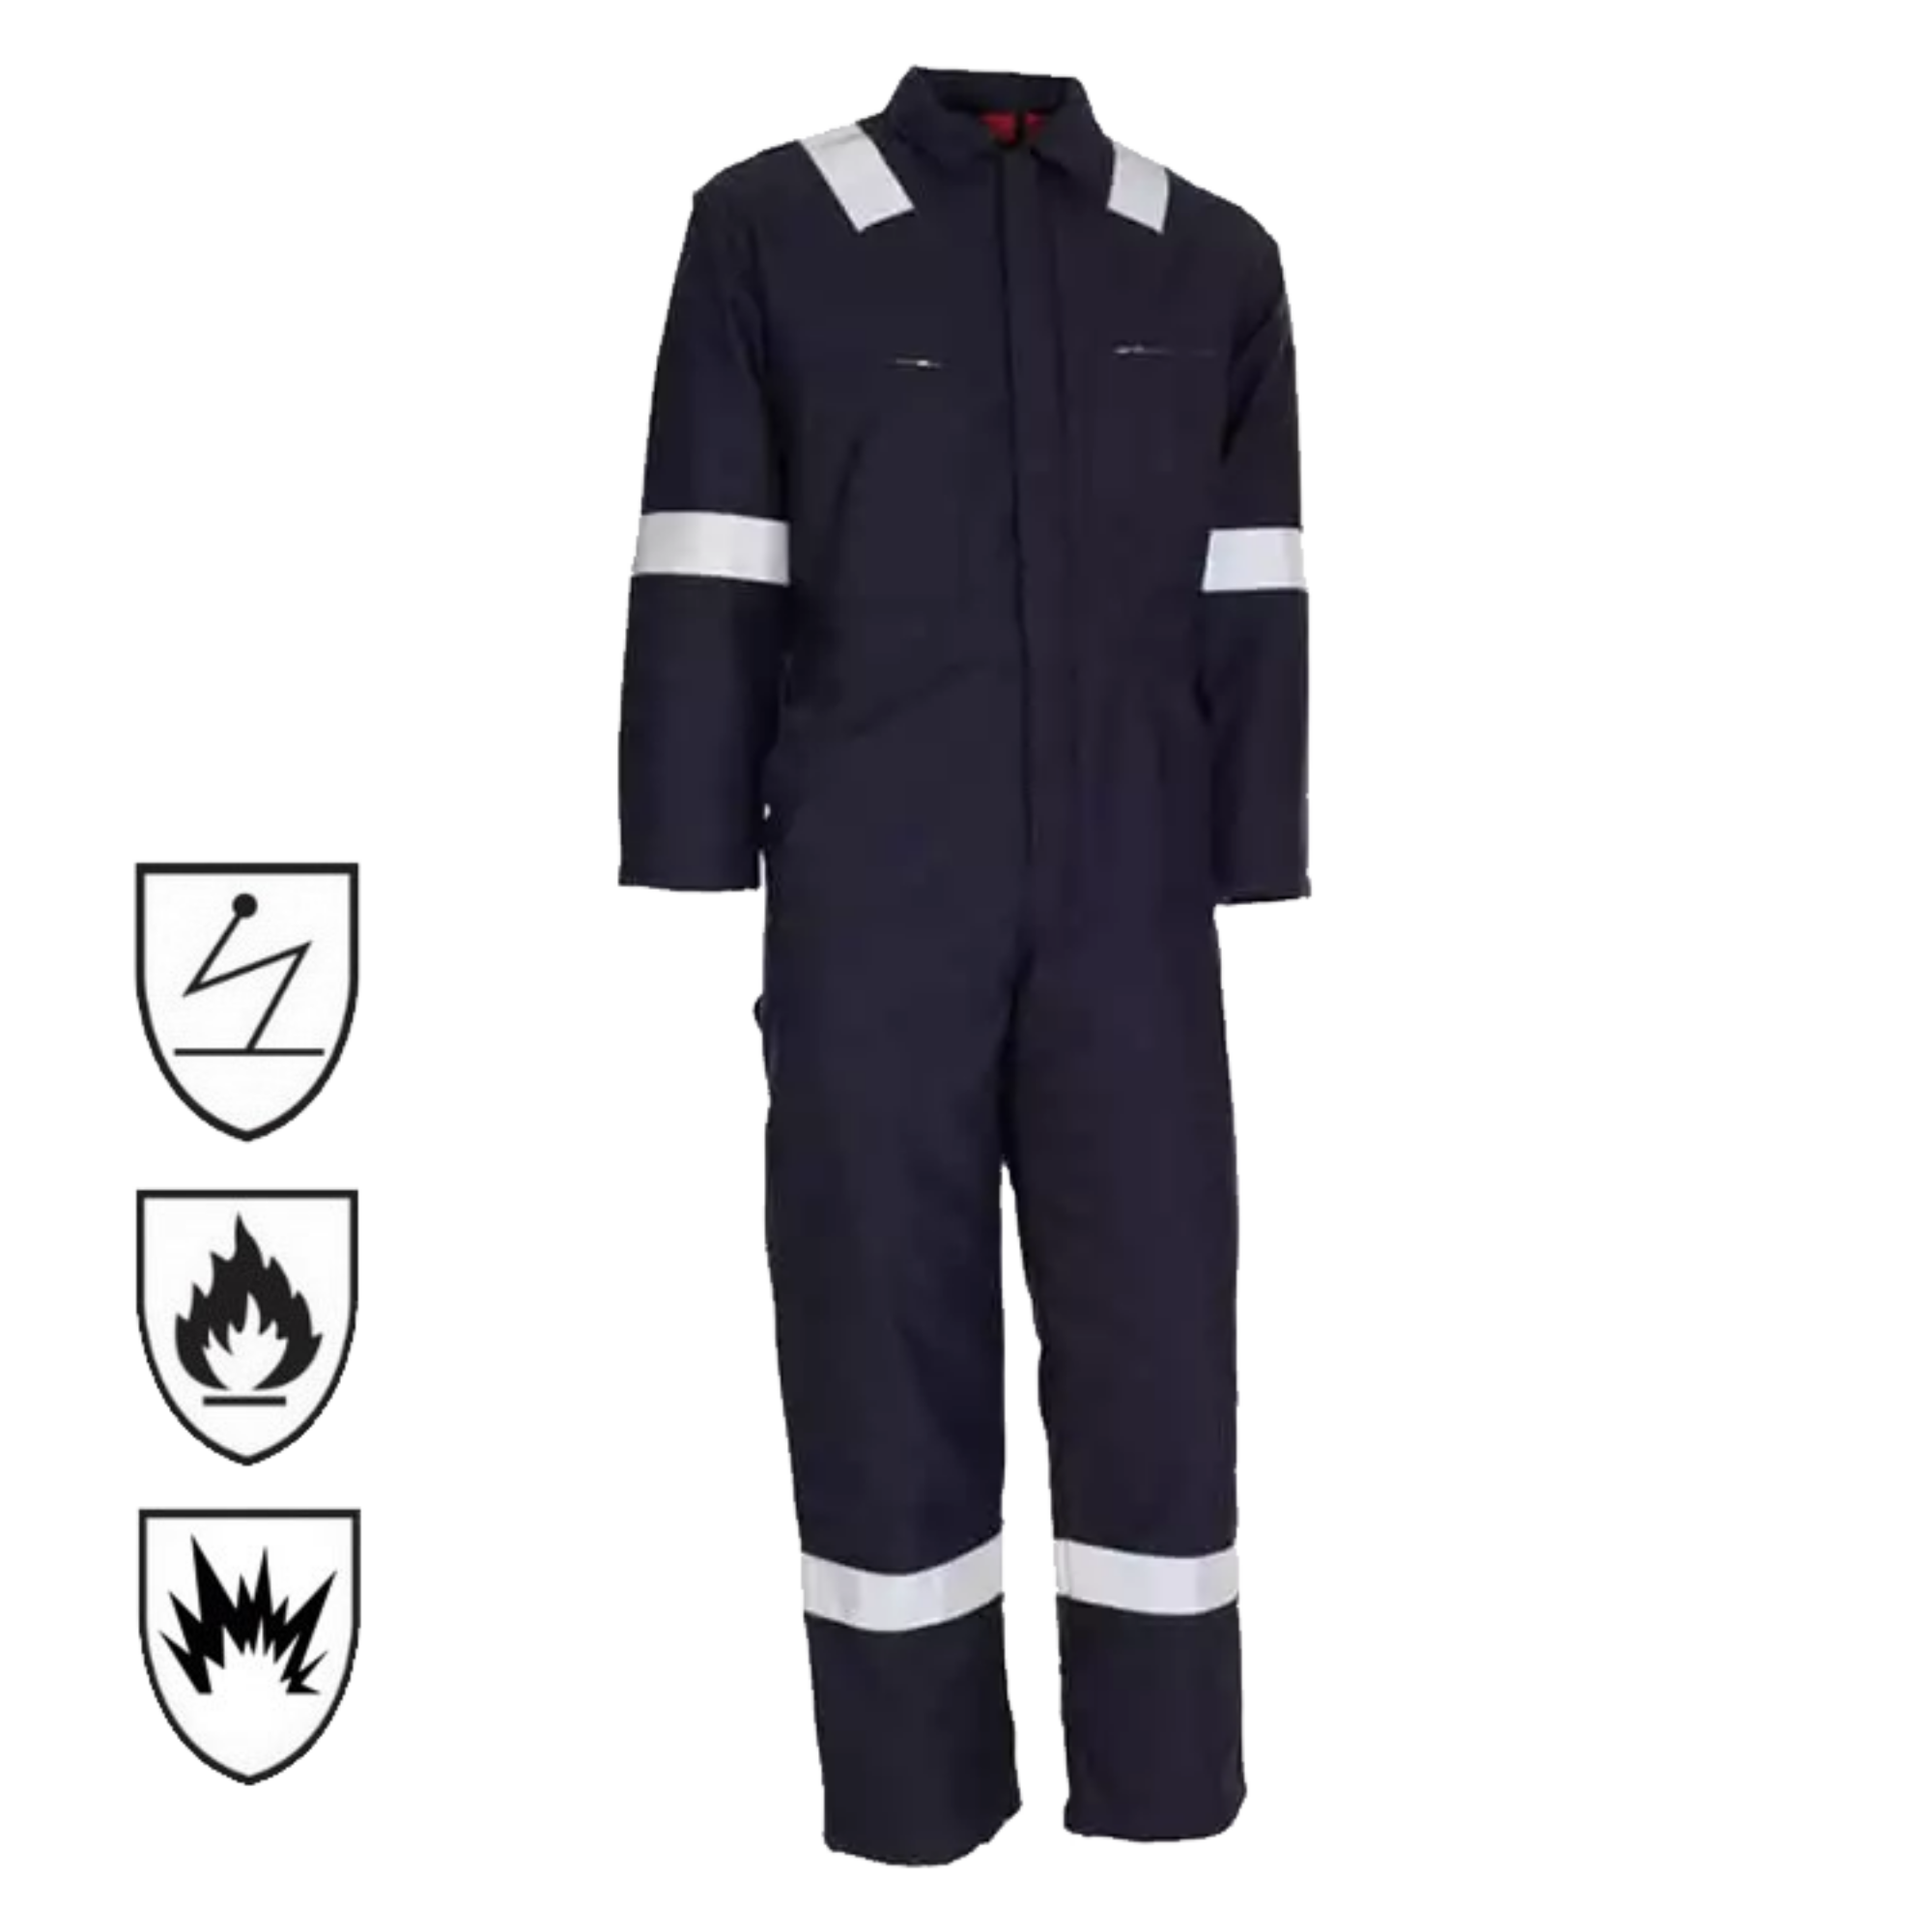  Extreme Protect Hi Vis Reflective Fireproof  Coveralls Traffic Oil Nomex Inherent Clothes